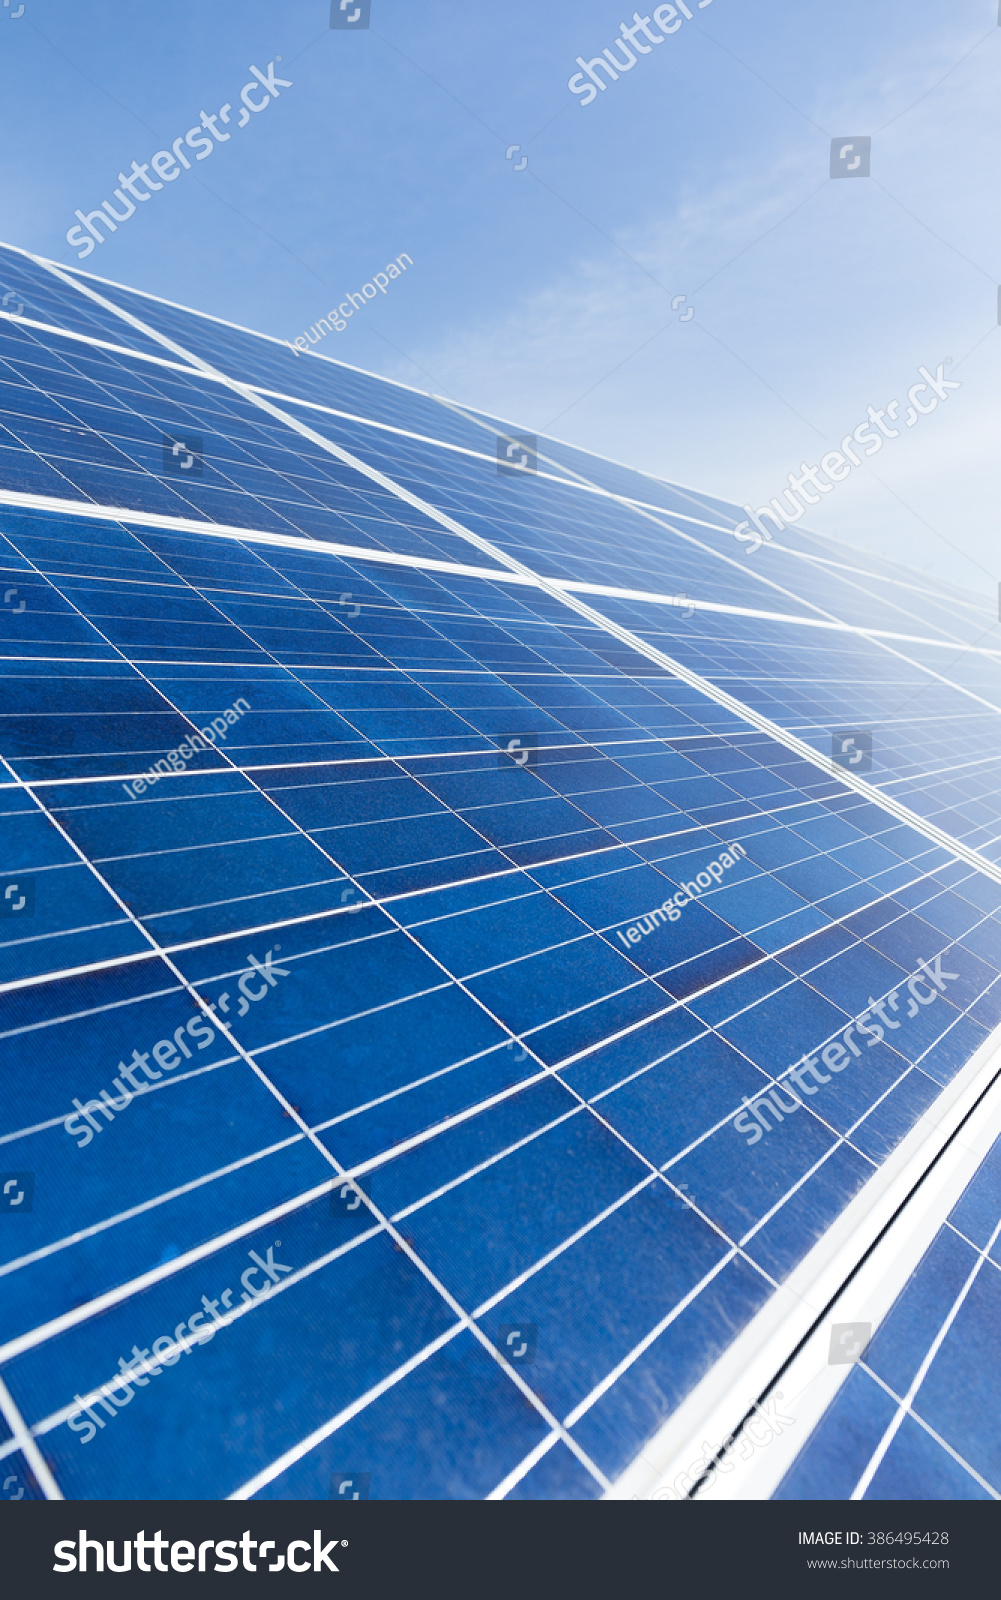 Solar Panel With Blue Sky Stock Photo 386495428 : Shutterstock